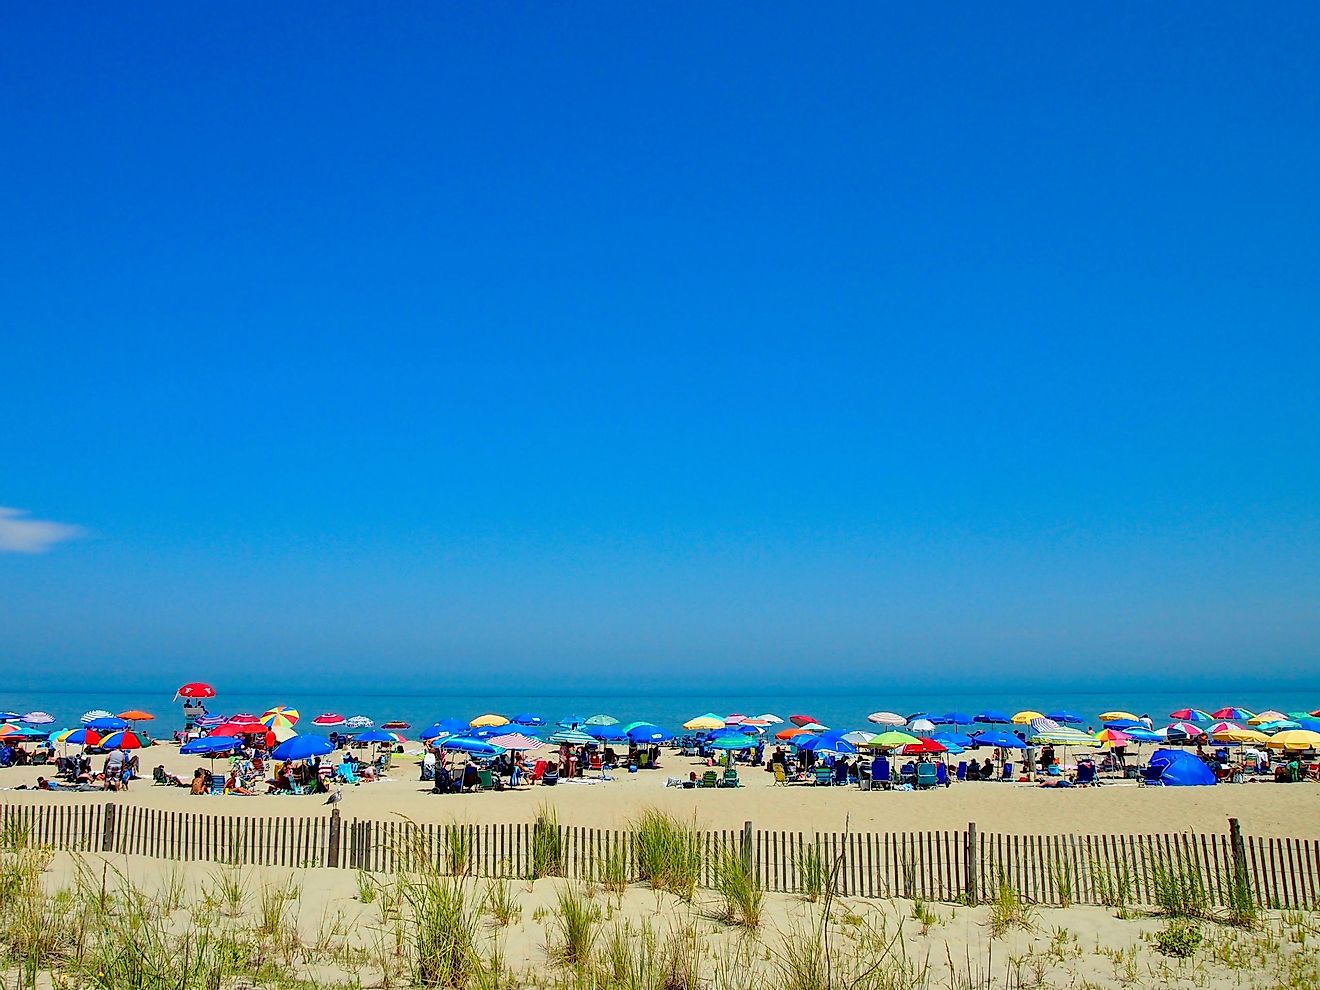 A summer afternoon in Rehoboth Beach.